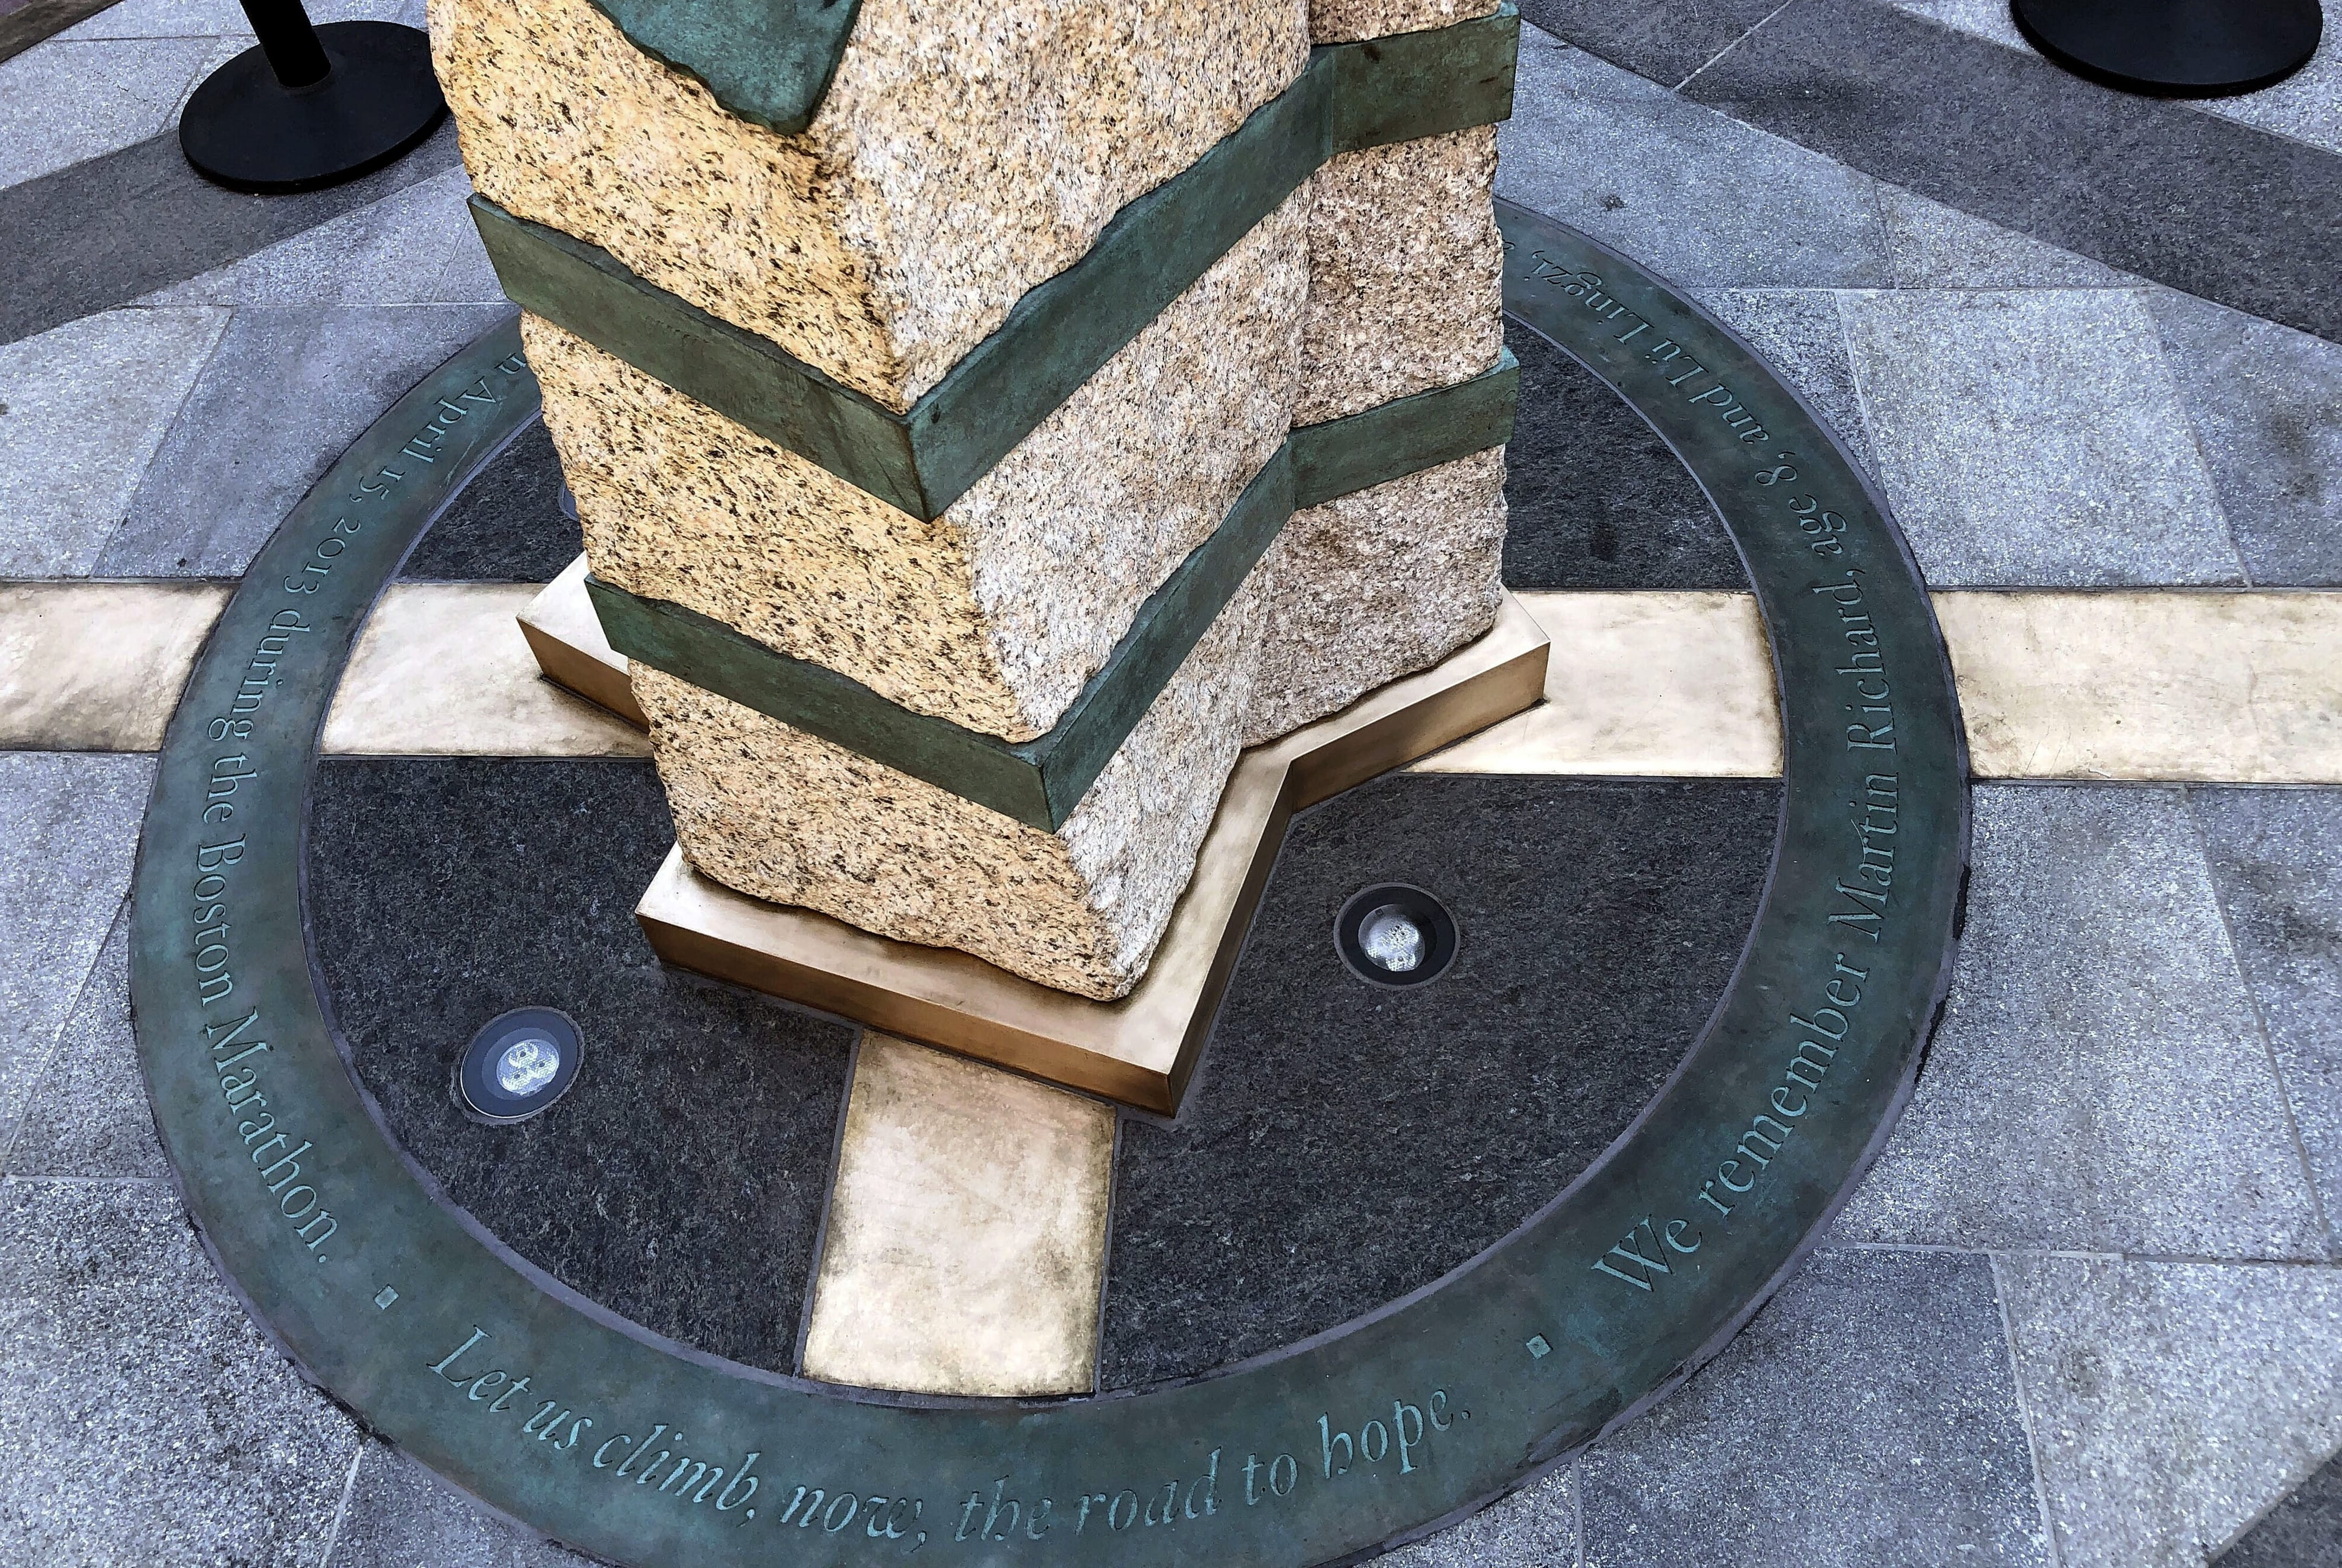 Inscriptions ring the base of two of the stone pillars completed Monday, Aug. 19, 2019, in Boston to memorialize the Boston Marathon bombing victims at the sites where they were killed. Martin Richard, Krystle Campbell and Lingzi Lu were killed when bombs were detonated at two locations near the finish line on April 15, 2013.